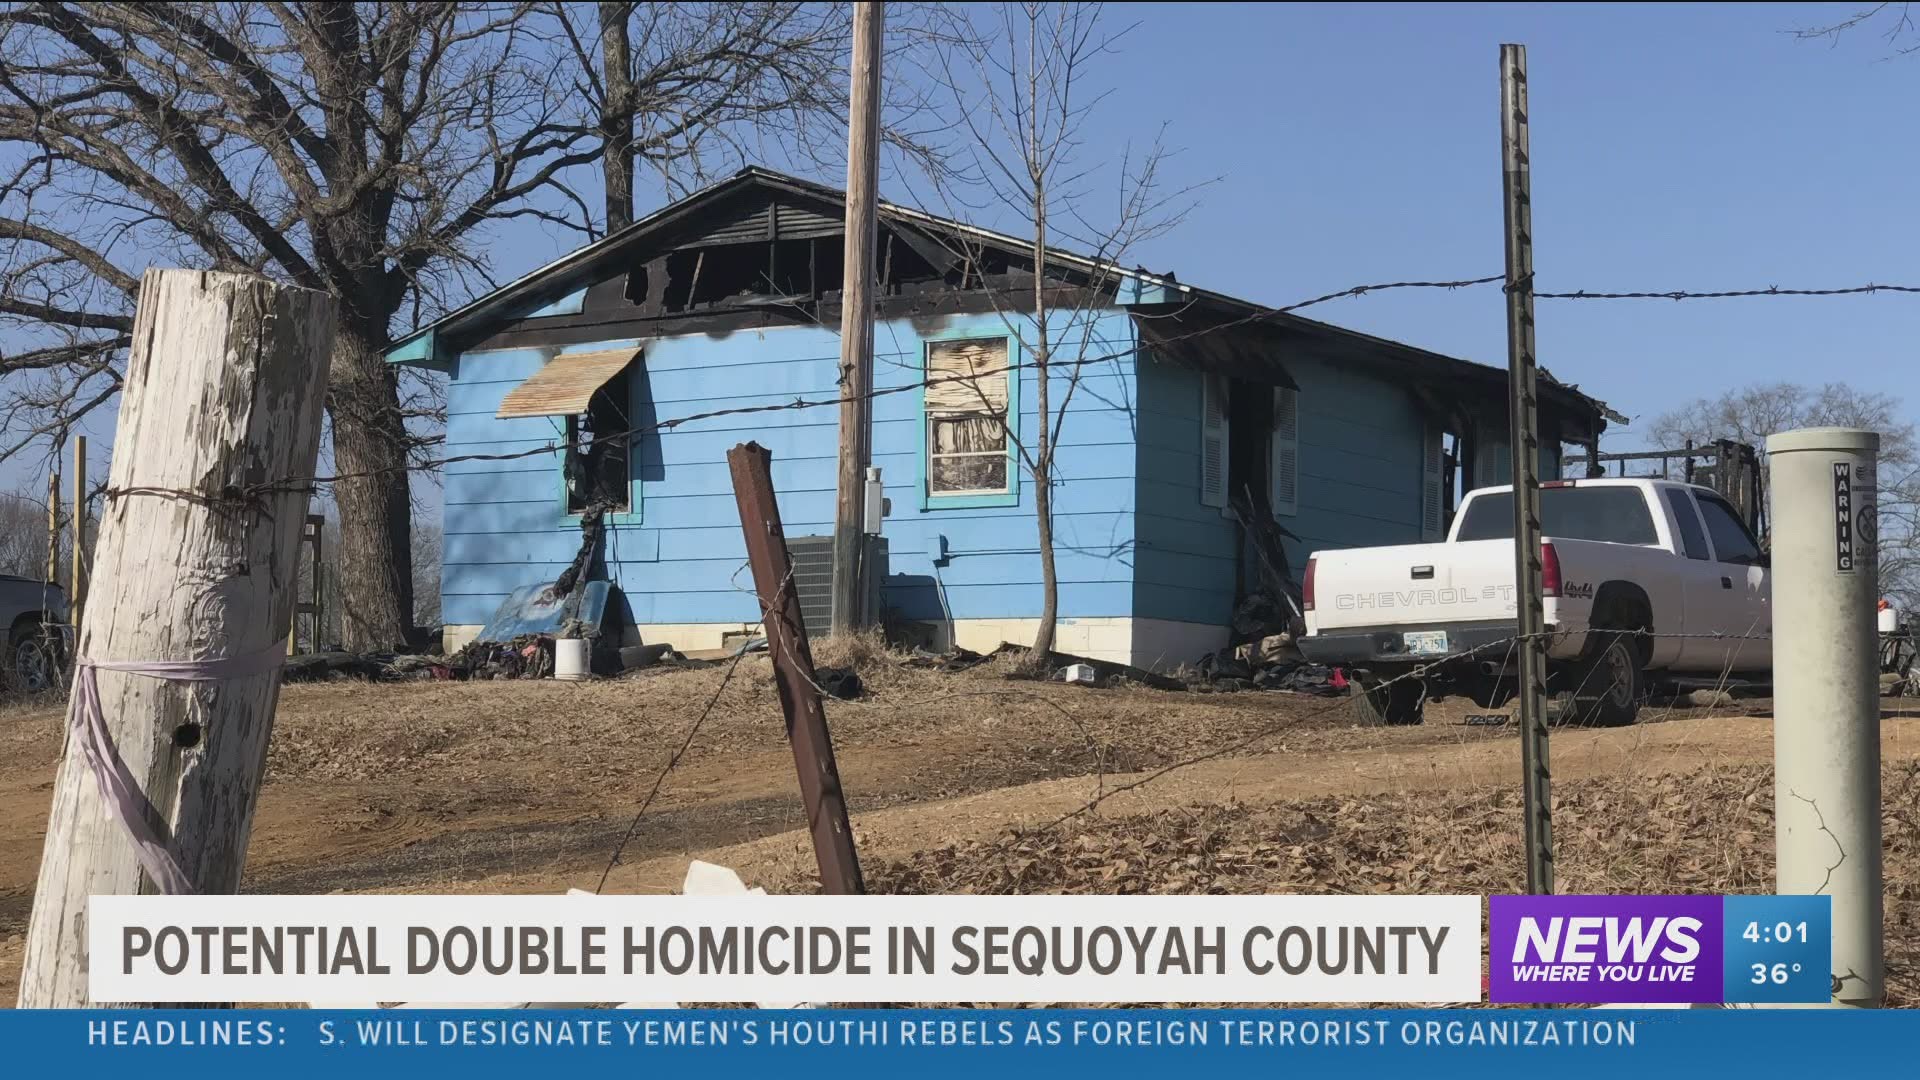 Police investigate potential double homicide in Sequoyah County